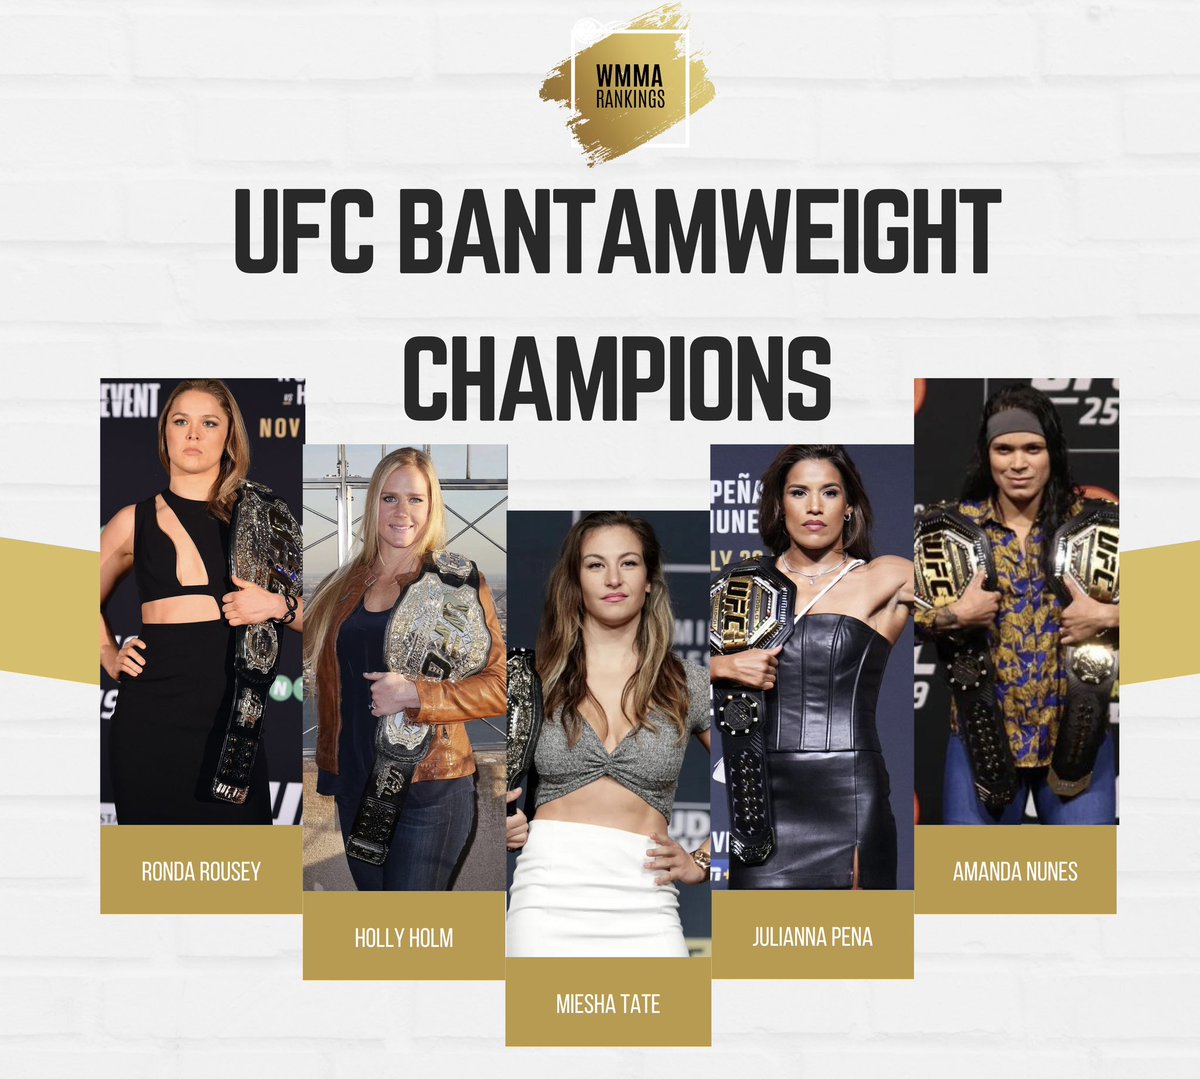 FIVE women have held the UFC bantamweight title since its inception in late 2012.

Can Irene Aldana become the SIXTH at #UFC289 on June 10? Or will Amanda Nunes reign supreme?

#UFC #WMMA https://t.co/qPEo1nCcIG